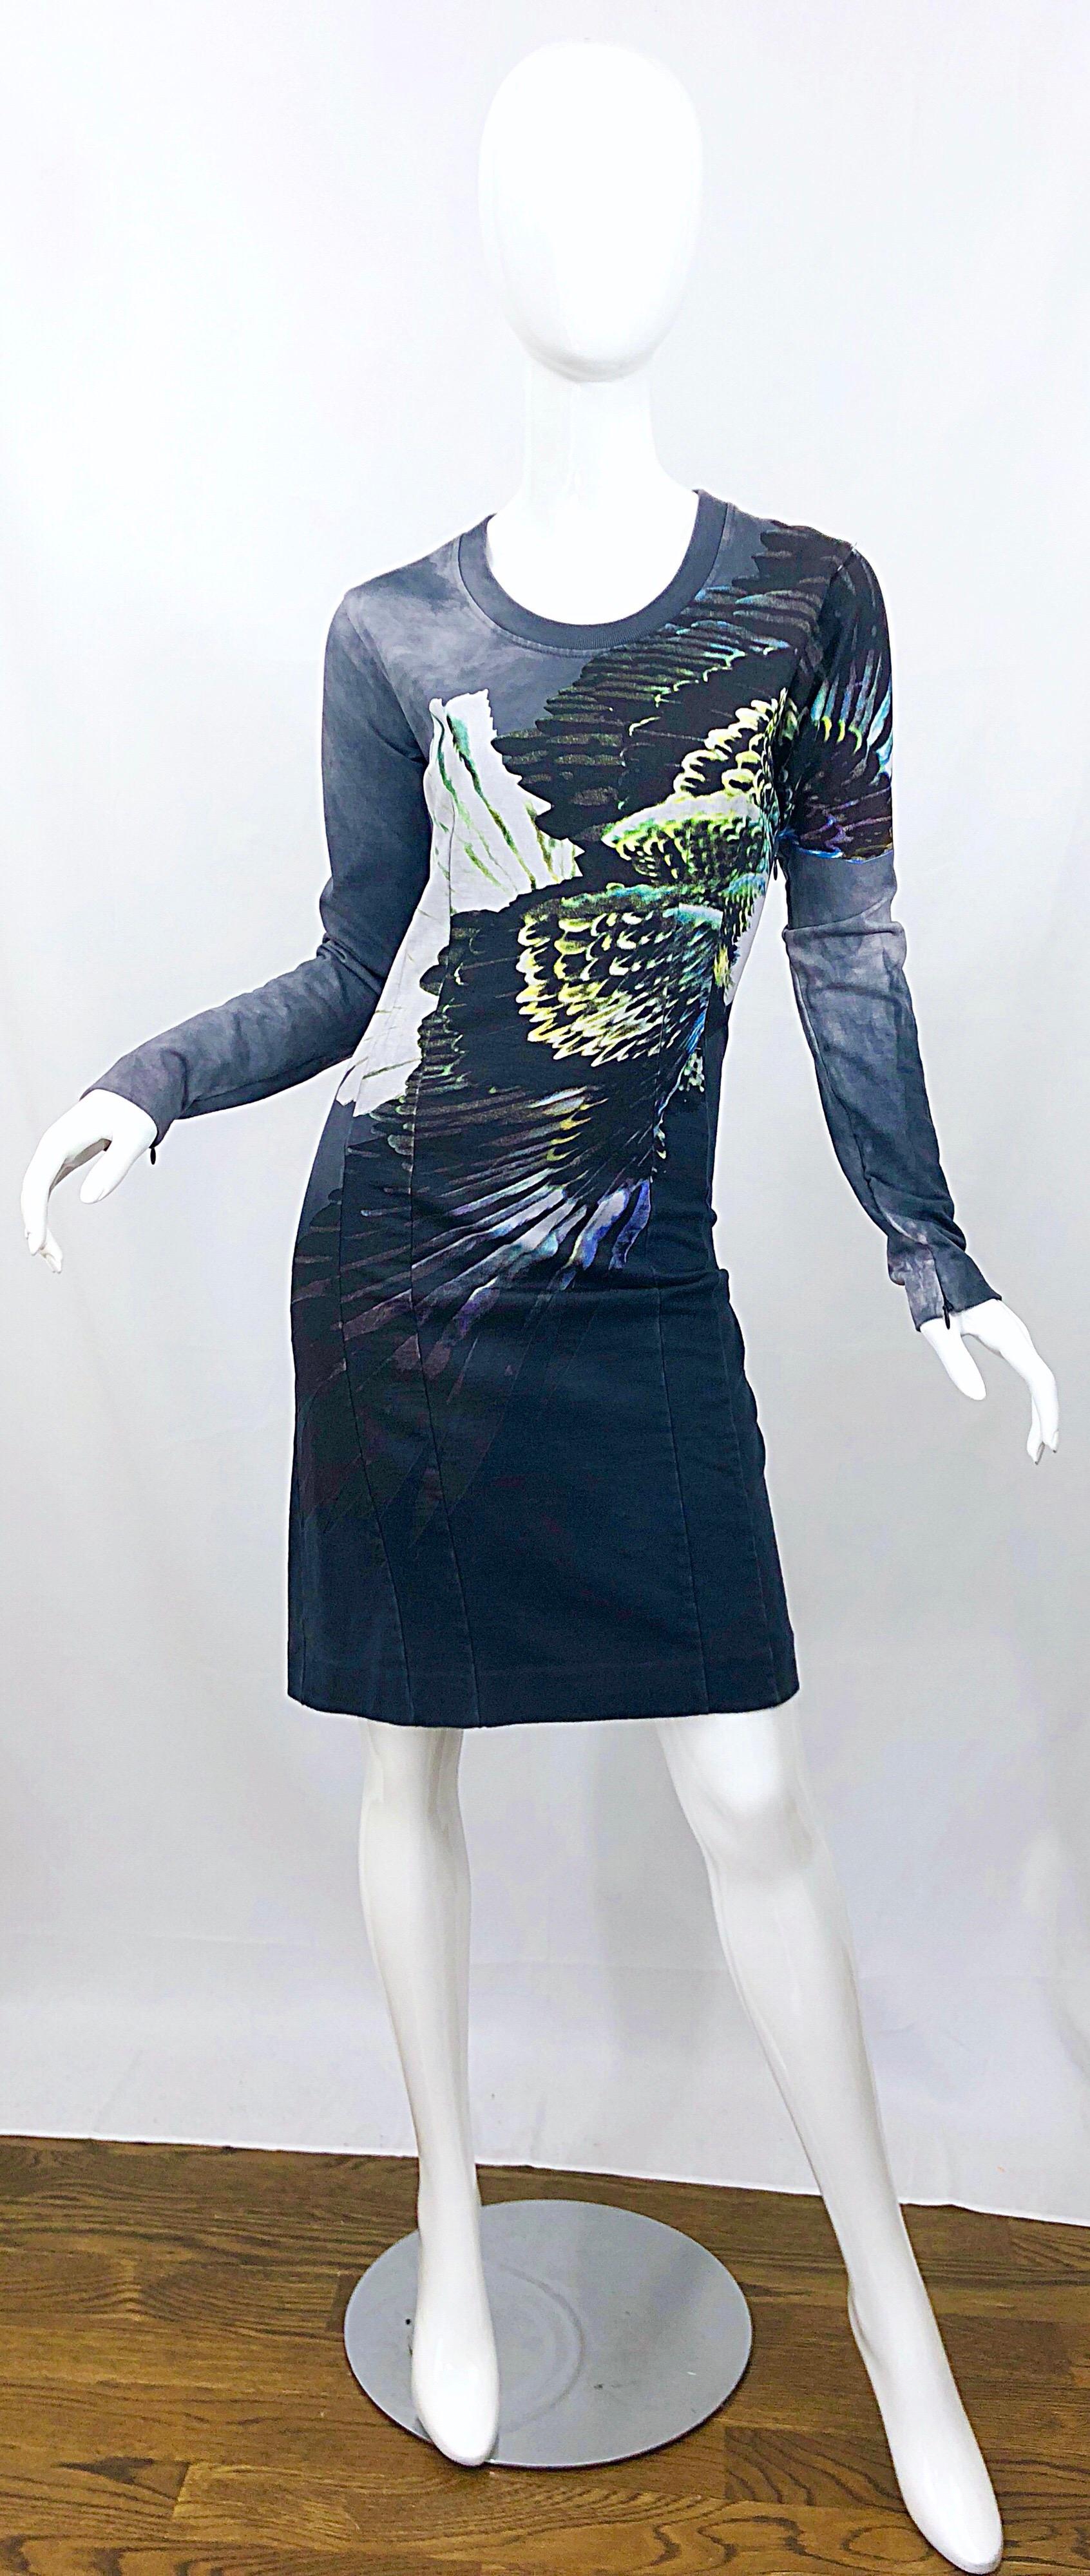 Amazing MAISON MARTIN MARGIELA eagle print long sleeve sweatshirt dress!!! Bald eagle print on the left side with vibrant colors of green, yellow, purple, blue, and white on a gray weathered sweatshirt cotton. Hidden zipper up the side and at each